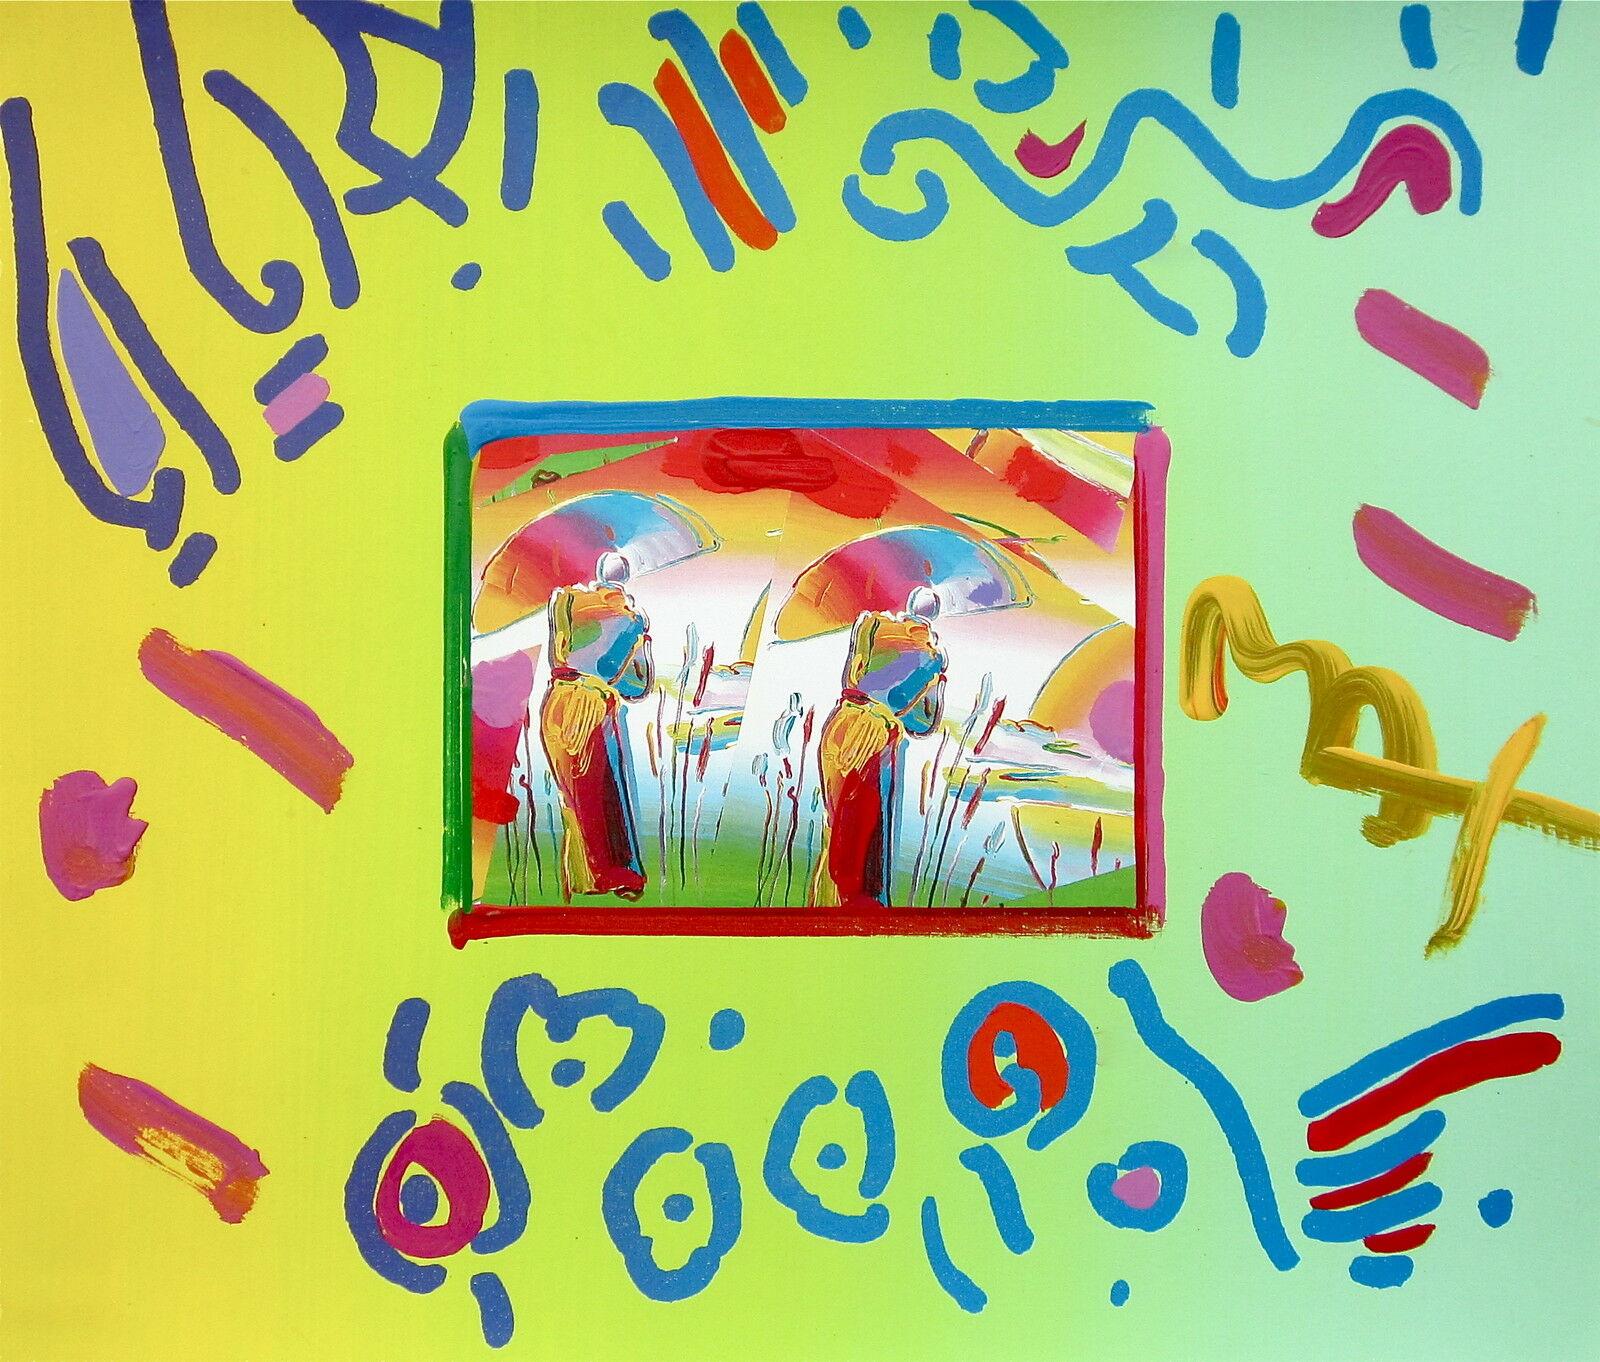 Artist: Peter Max (1937)
Title: Two Sages
Year: 1998
Medium: Lithograph and acrylic on Arches paper
Size: 12 x 14 inches
Condition: Excellent
Inscription: Signed and by the artist.

PETER MAX (1937- ) Peter Max has achieved huge success and